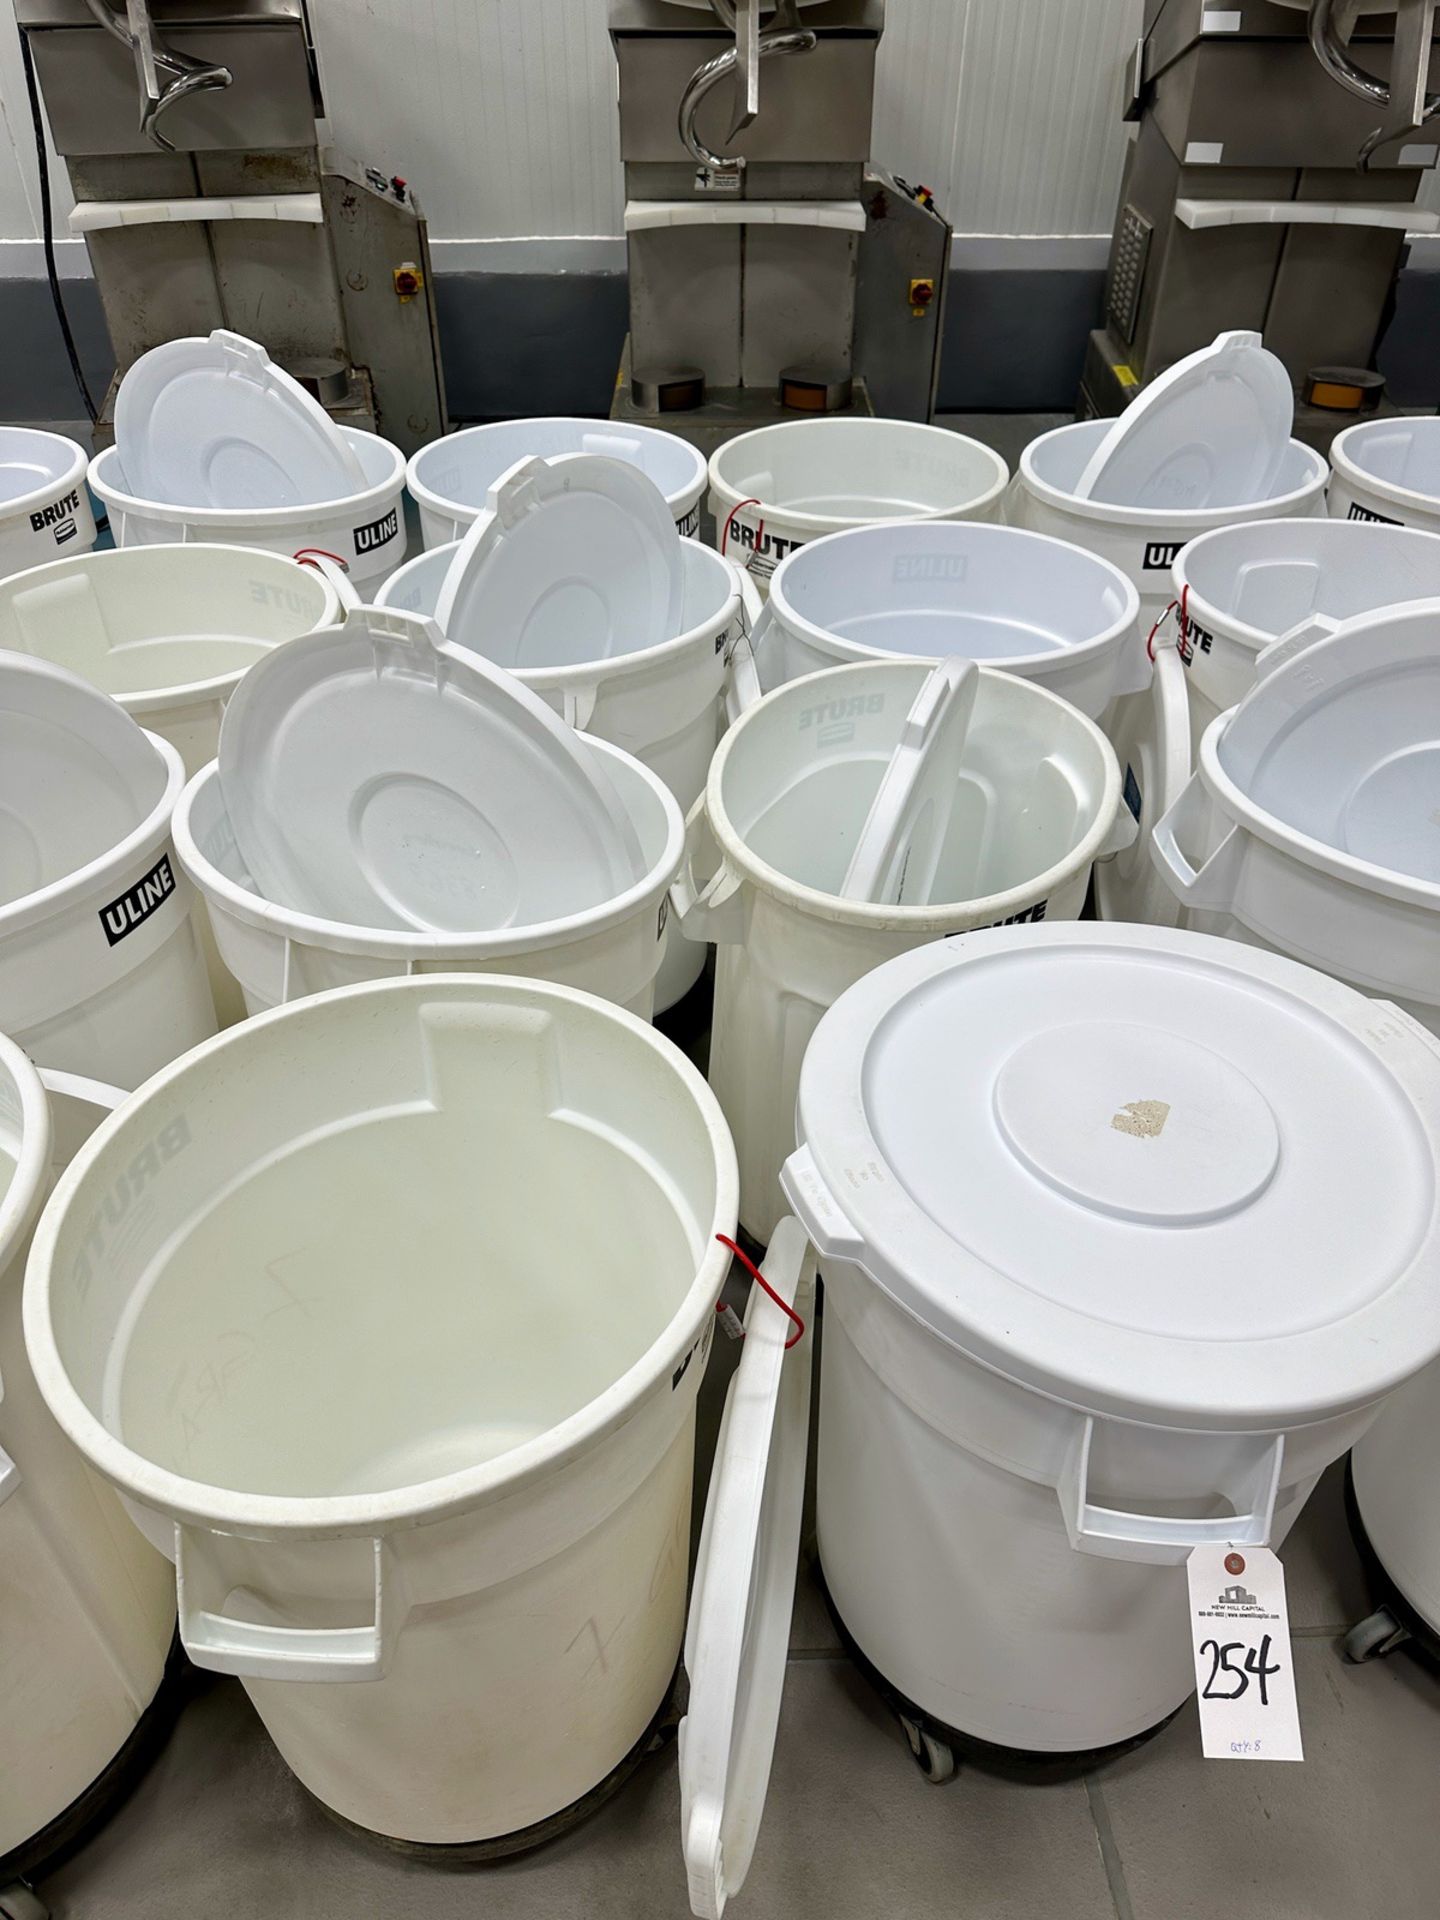 Lot of (8) 55 Gallon Drums on Dollies